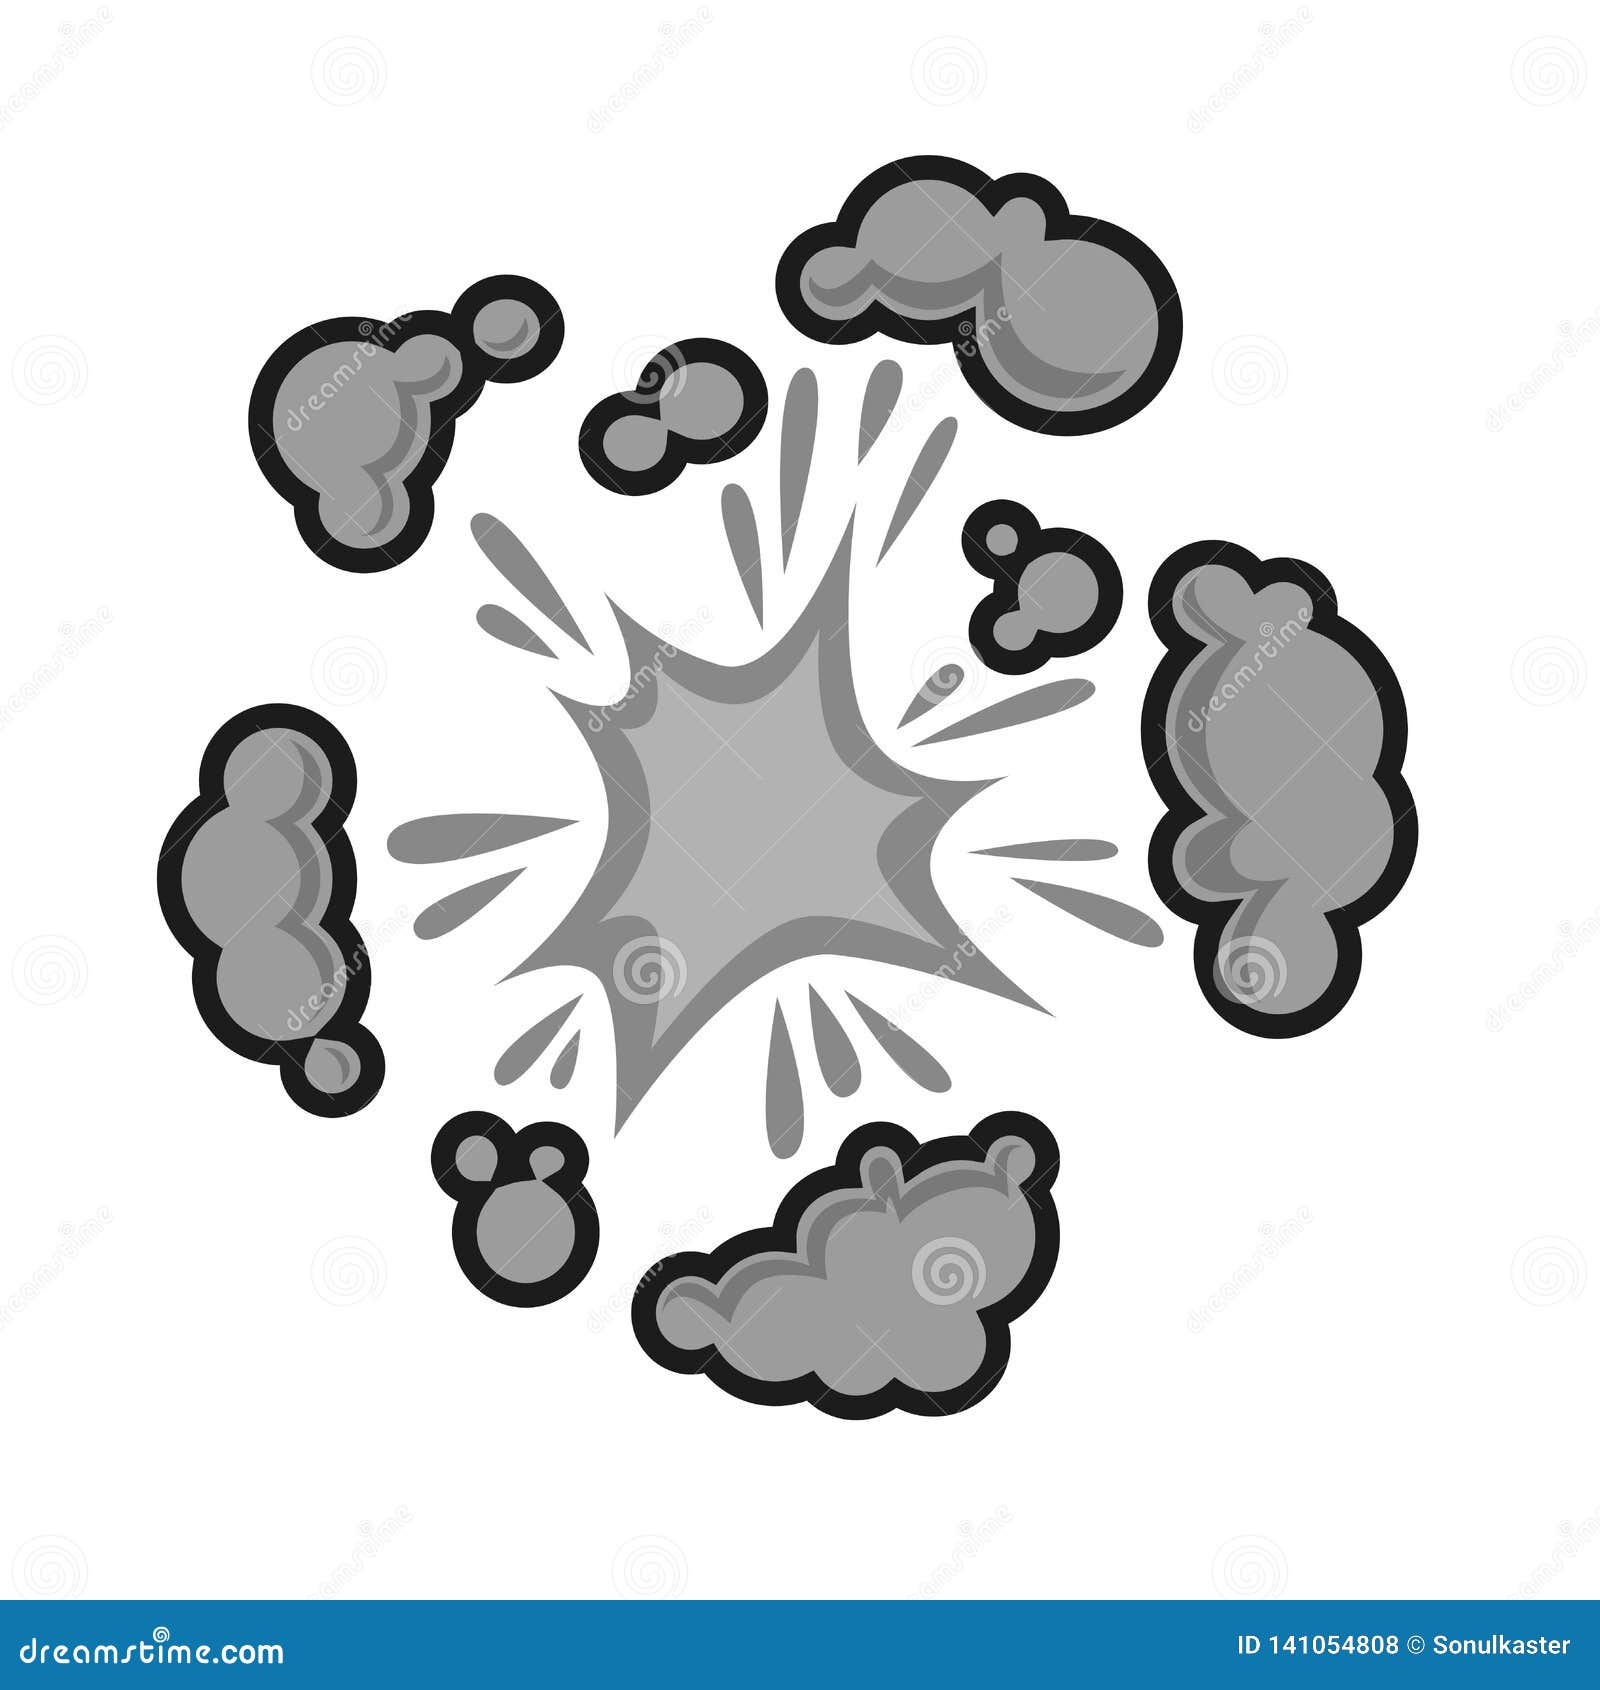 Pow Bubble Sound Blast Clouds for Cartoon or Comic Book with Explosions and  Puff Clouds Blasts Stock Vector - Illustration of explode, explosion:  141054808